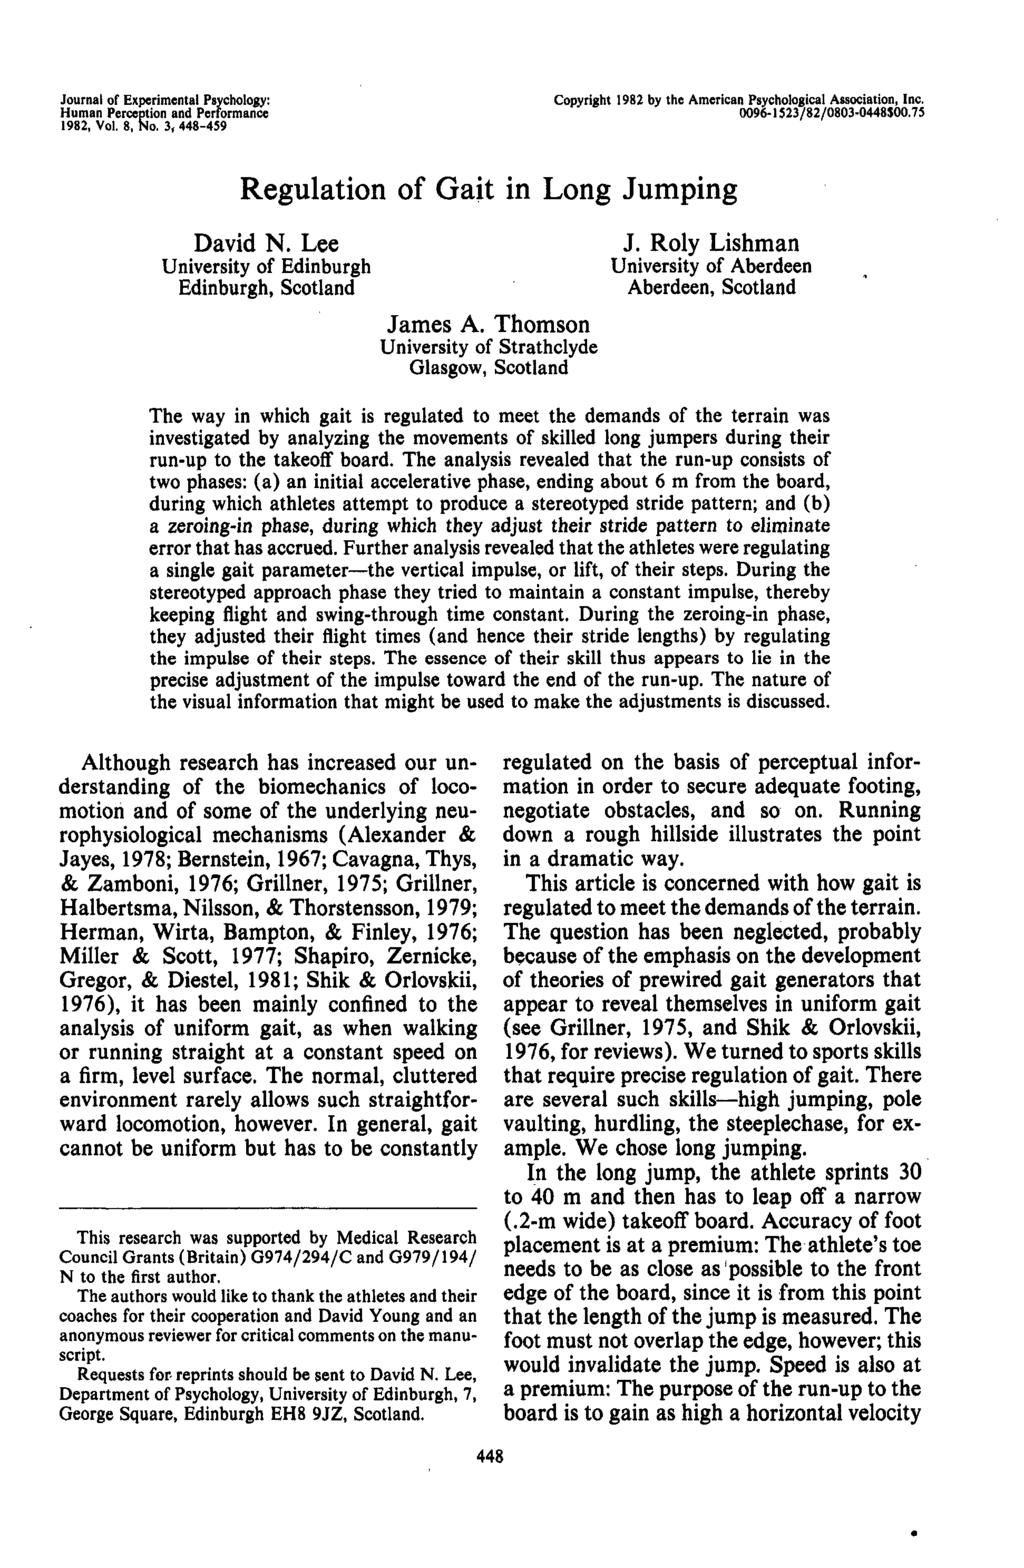 Journal of Experimental Psychology: Human Perception and Performance 1982, Vol. 8, No. 3, 448-459 Copyright 1982 by the American Psychological Association, Inc. 0096-1523/82/0803-0448J00.